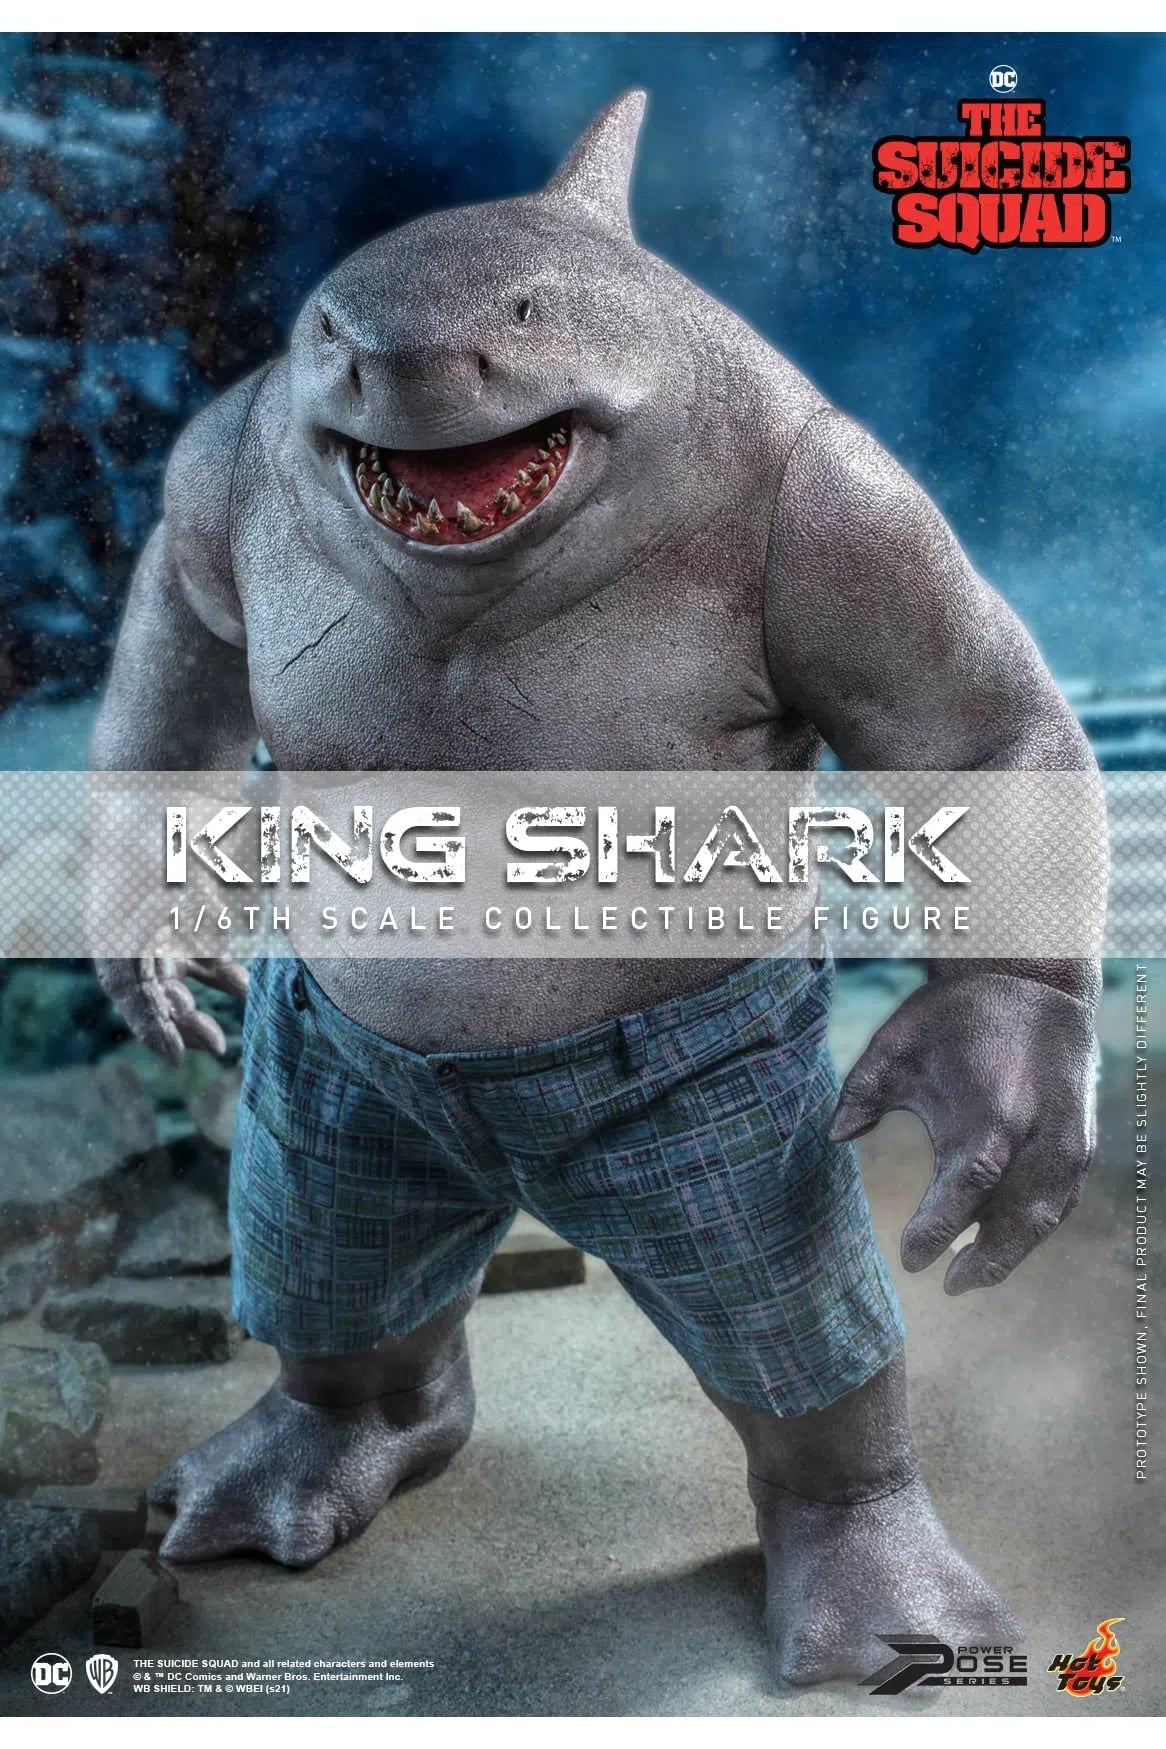 King Shark: The Suicide Squad: DC Comics: Power Pose: PPS006